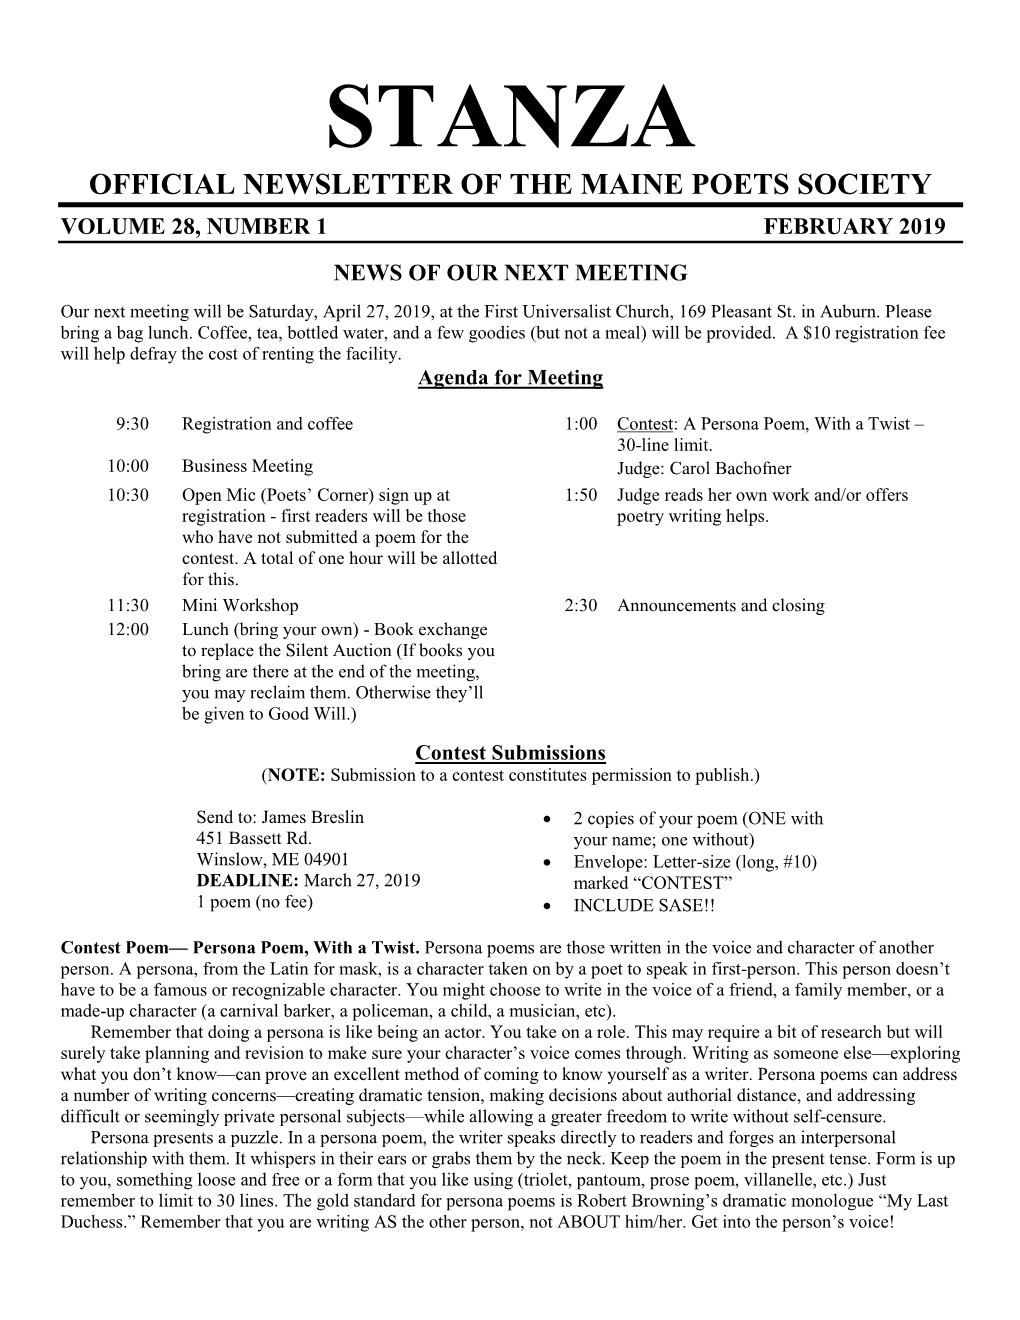 Stanza Official Newsletter of the Maine Poets Society Volume 28, Number 1 February 2019